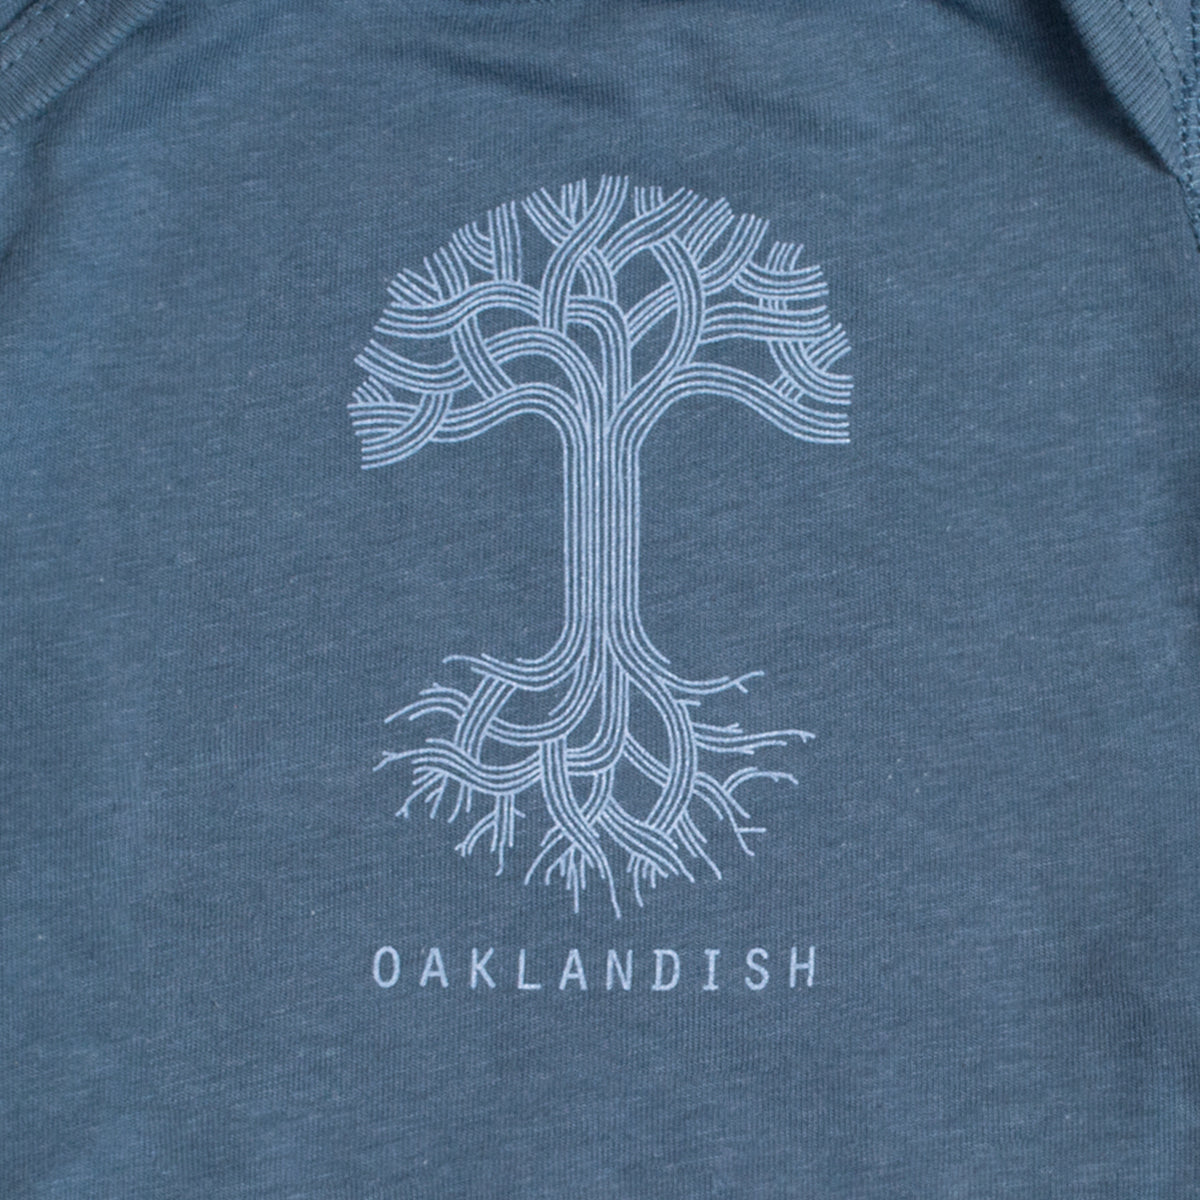 Close-up of light blue Oaklandish tree logo and wordmark on the chest of an indigo infant one-piece.